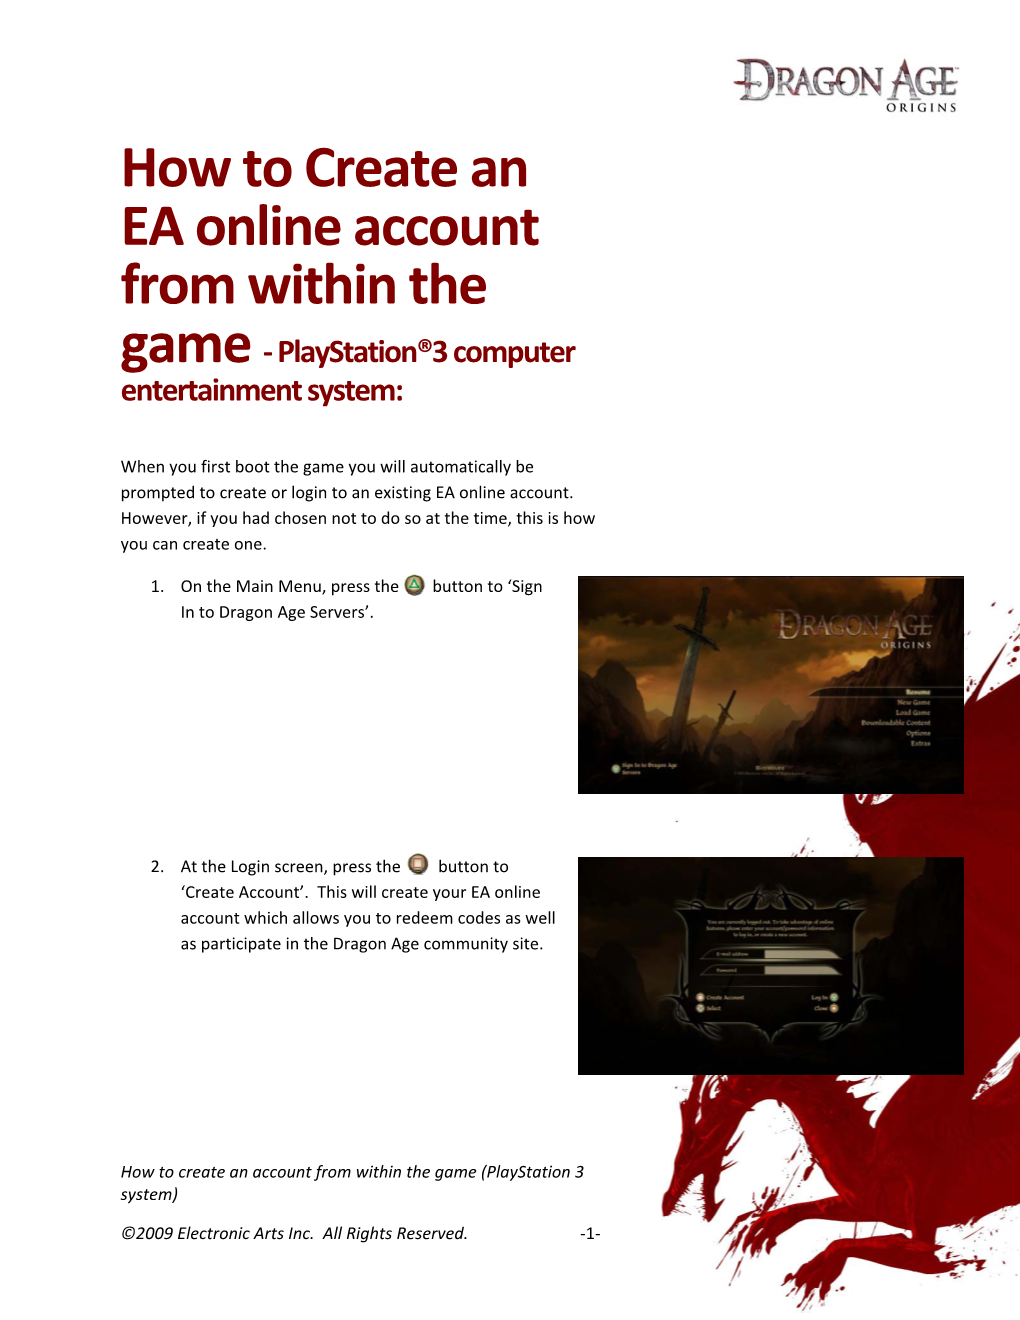 How to Create an EA Online Account from Within the Game ‐ Playstation®3 Computer Entertainment System